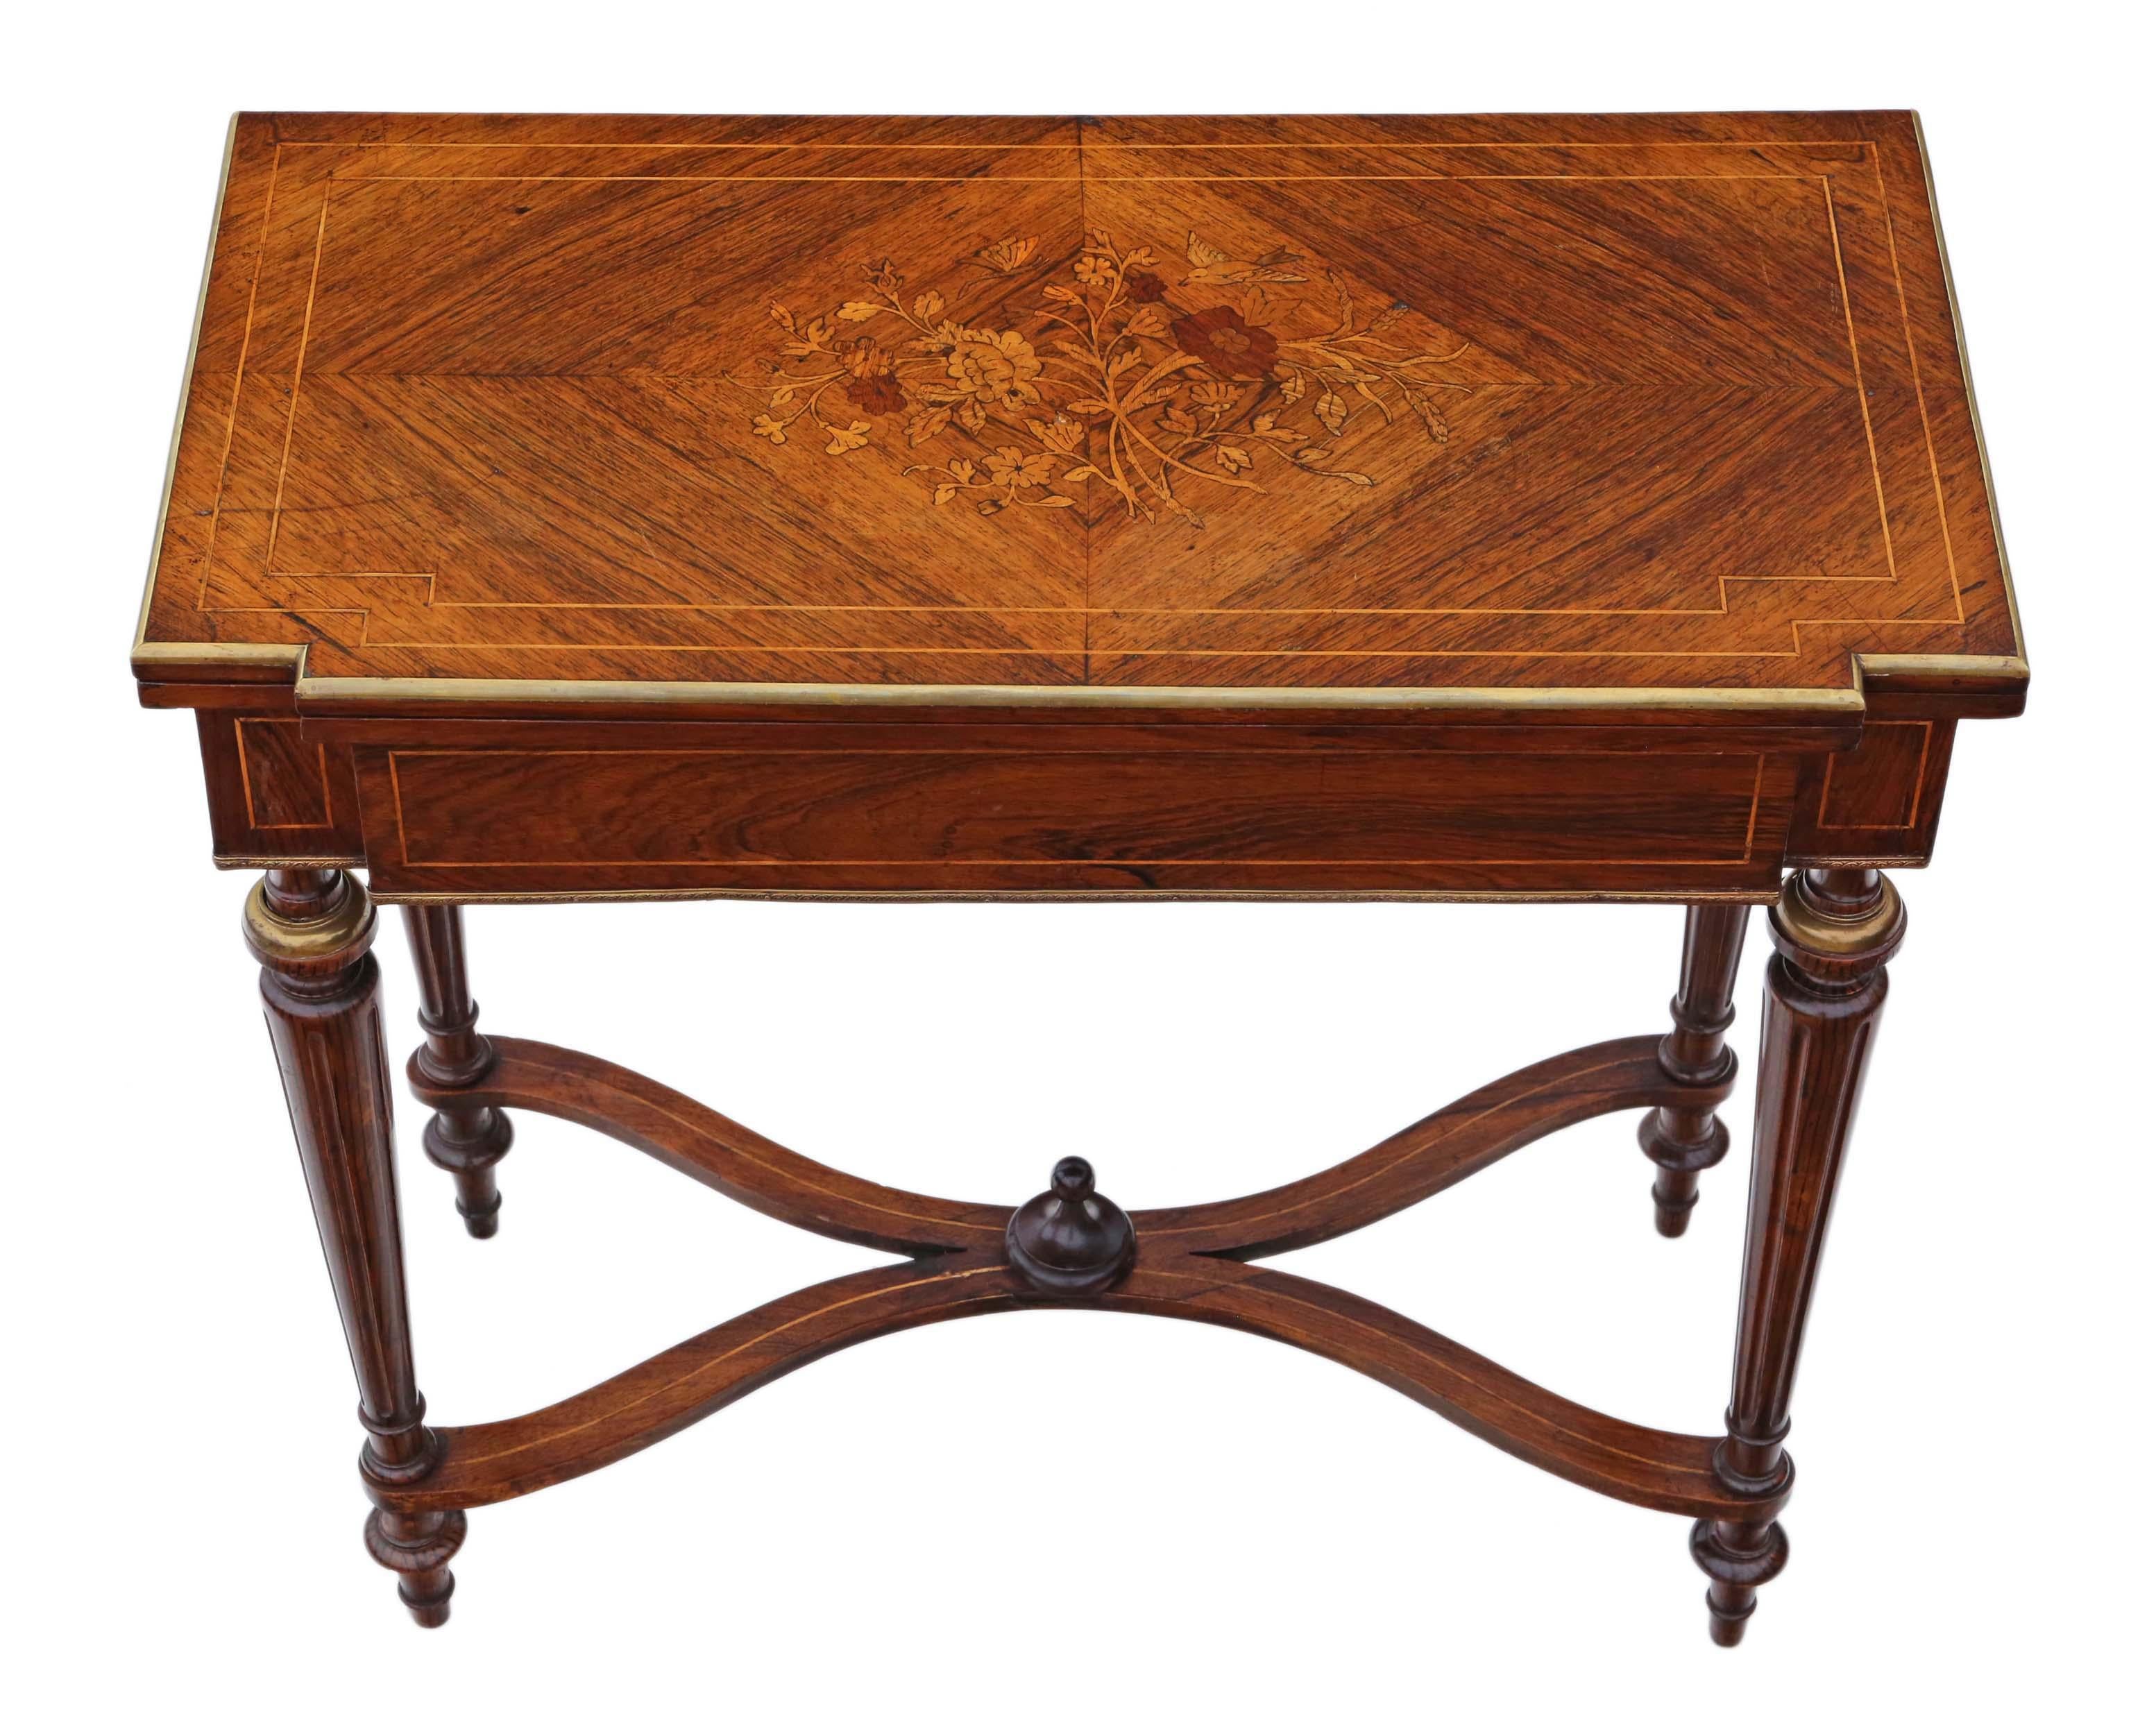 19th century rosewood marquetry folding card or tea table. Inlaid brass edging and decoration.
Solid and strong, with no loose joints. Full of age, character and charm.
Would look great in the right location! A very good quality table with a great